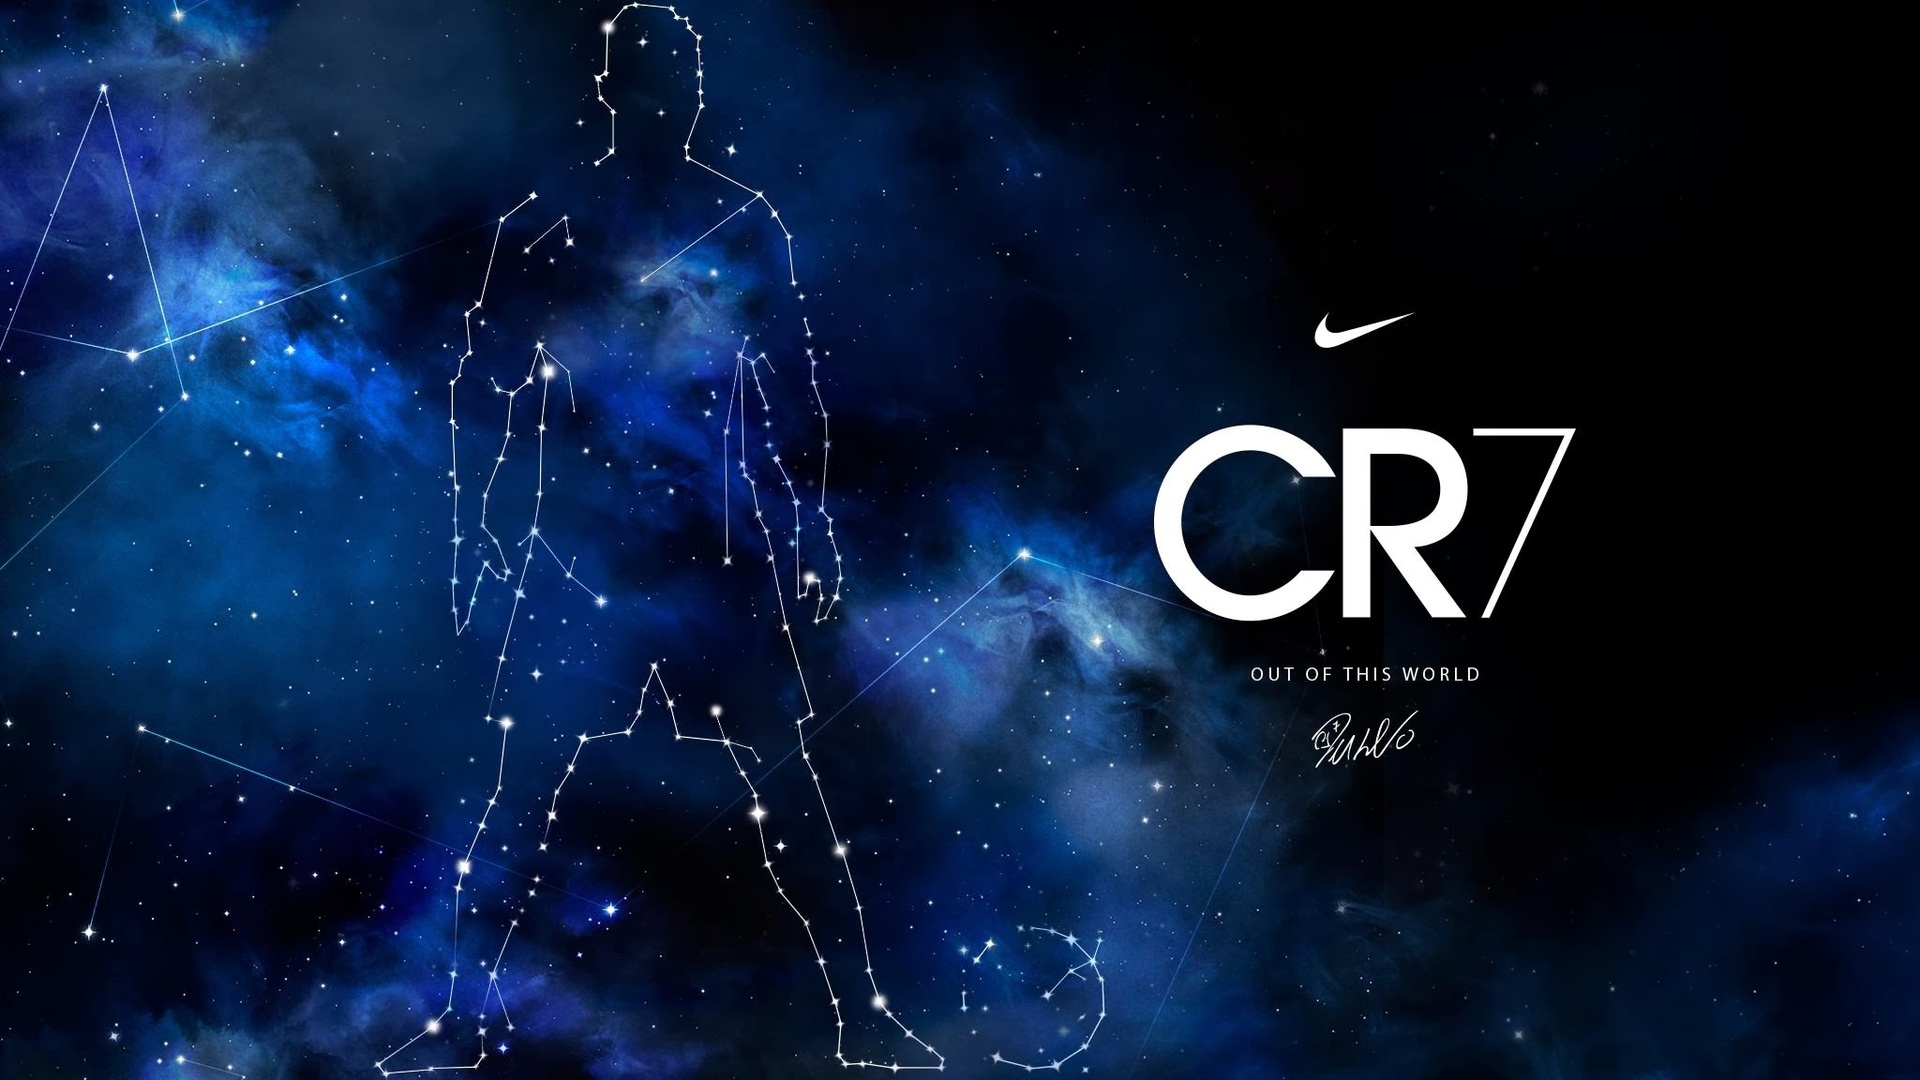 Football Soccer Galaxy Out Of This World Nike Cr7